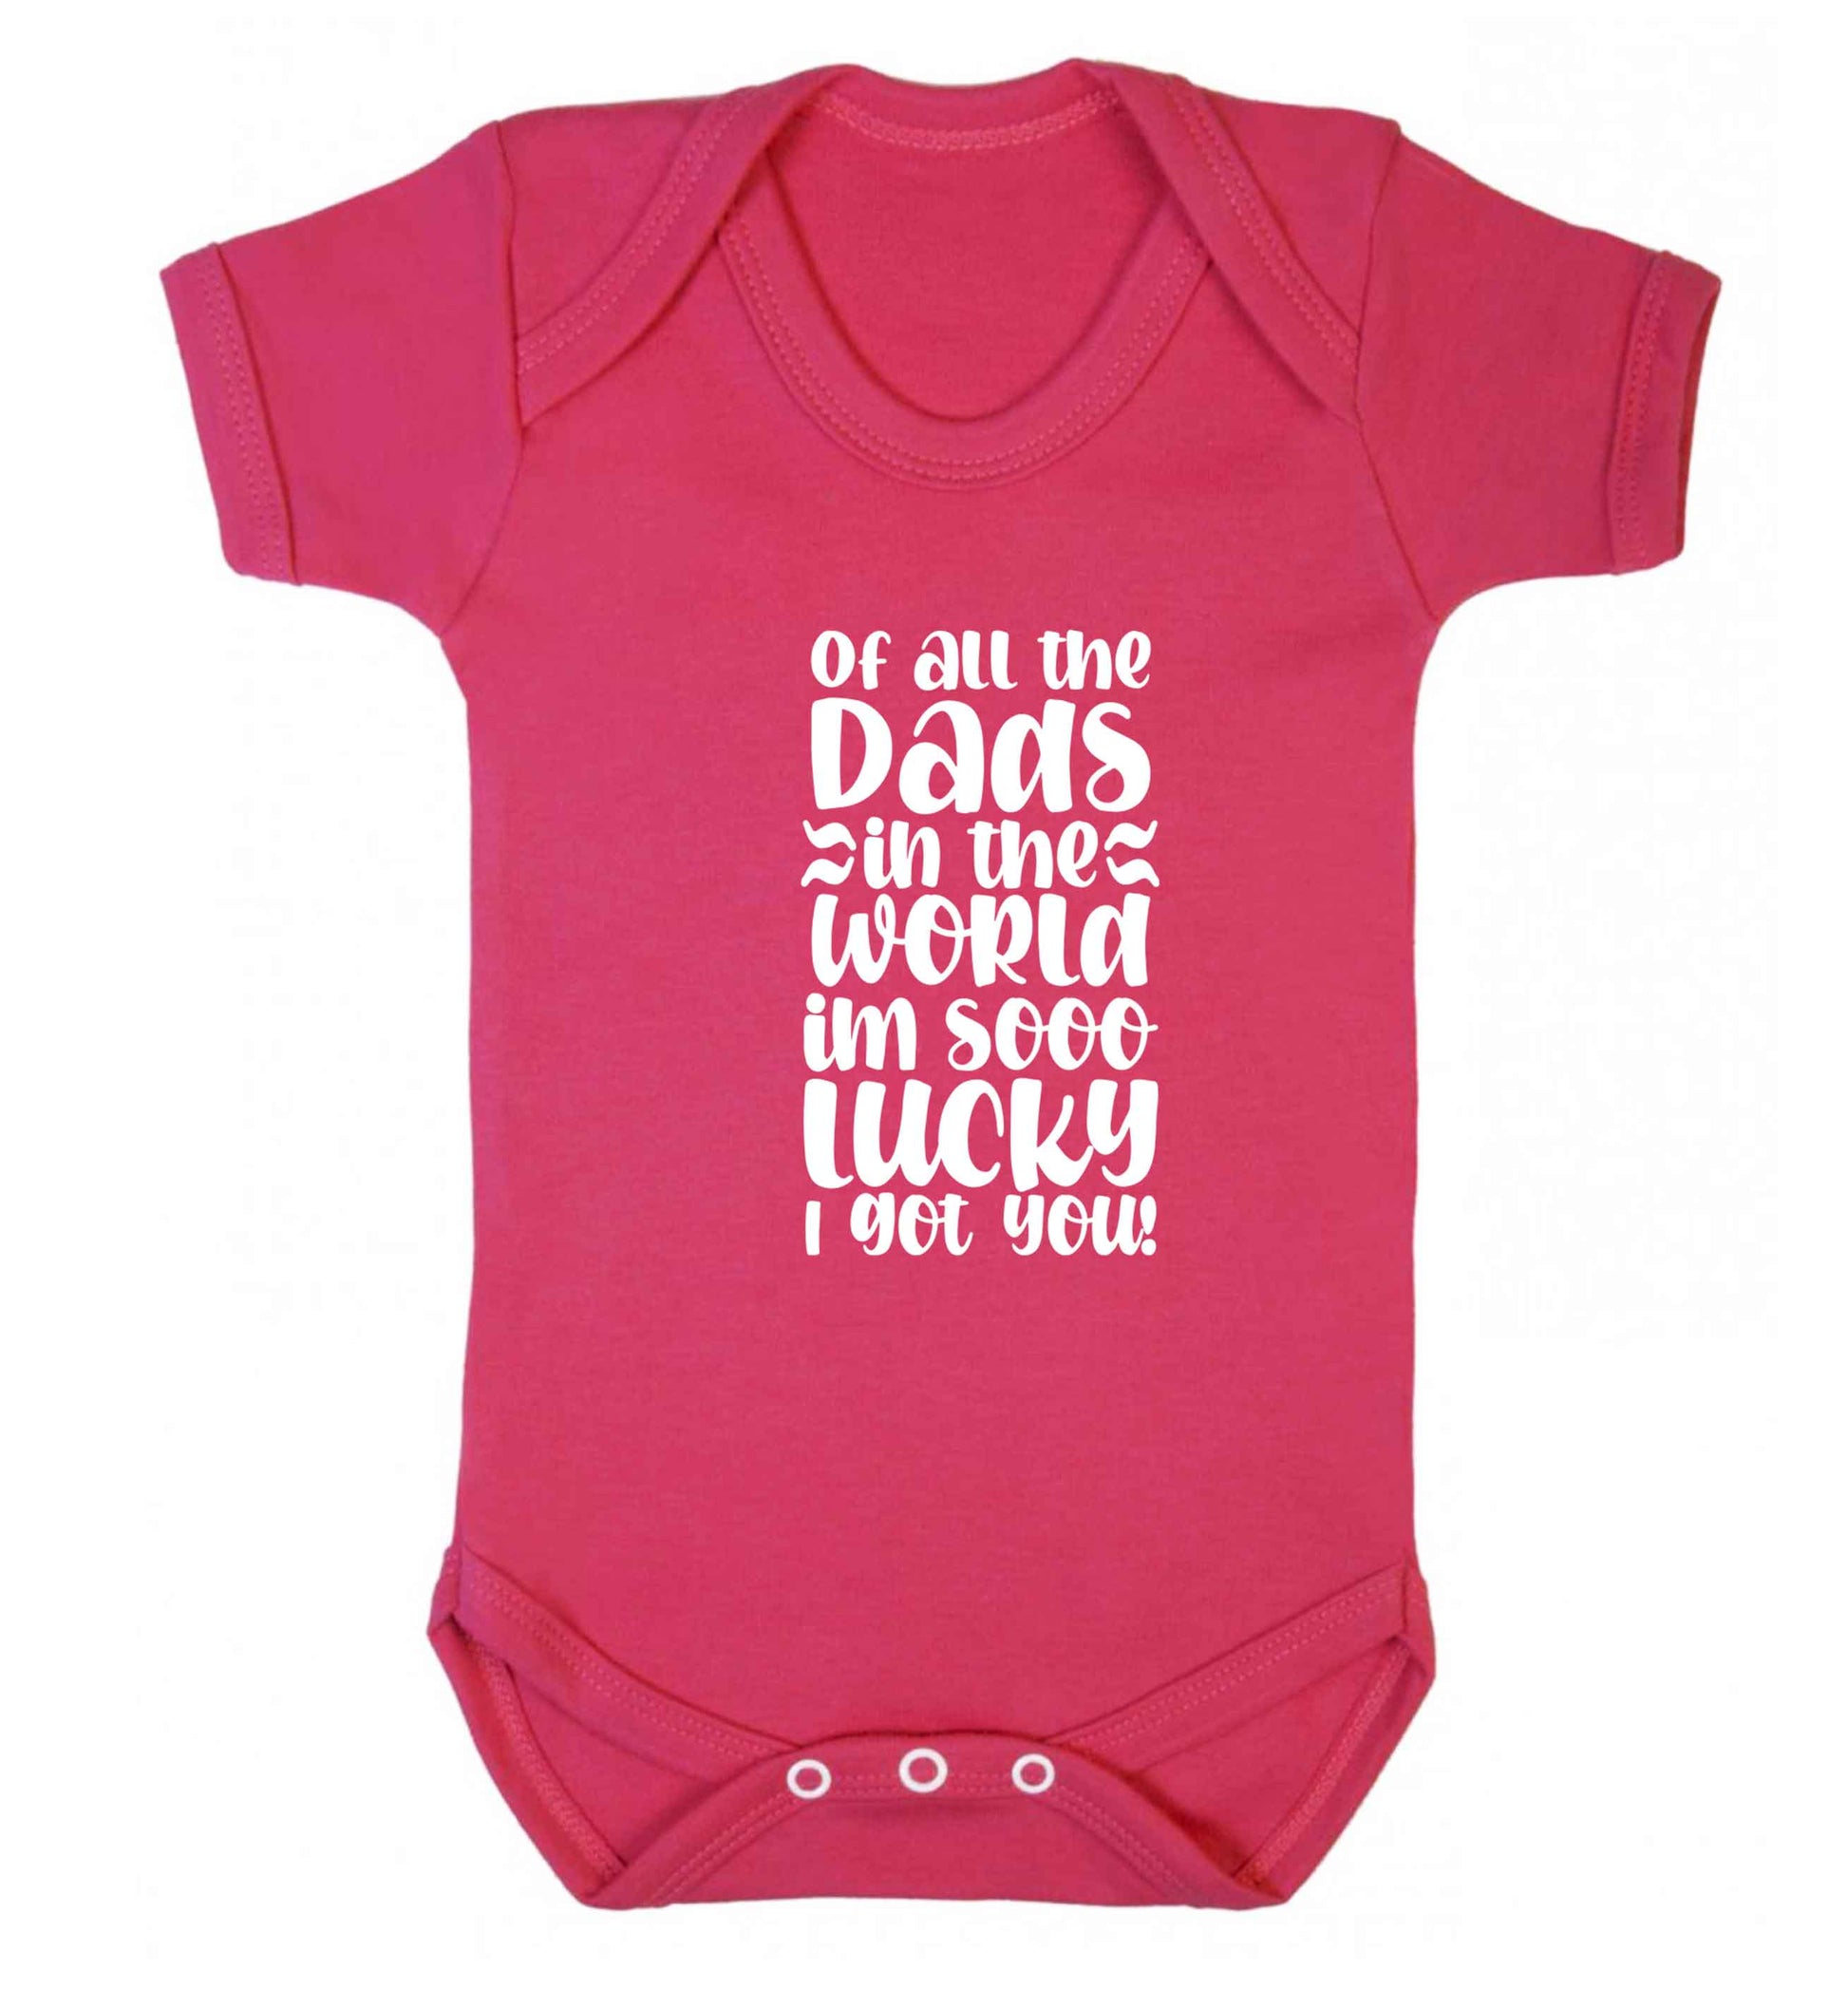 I'm as lucky as can be the worlds greatest dad belongs to me! baby vest dark pink 18-24 months